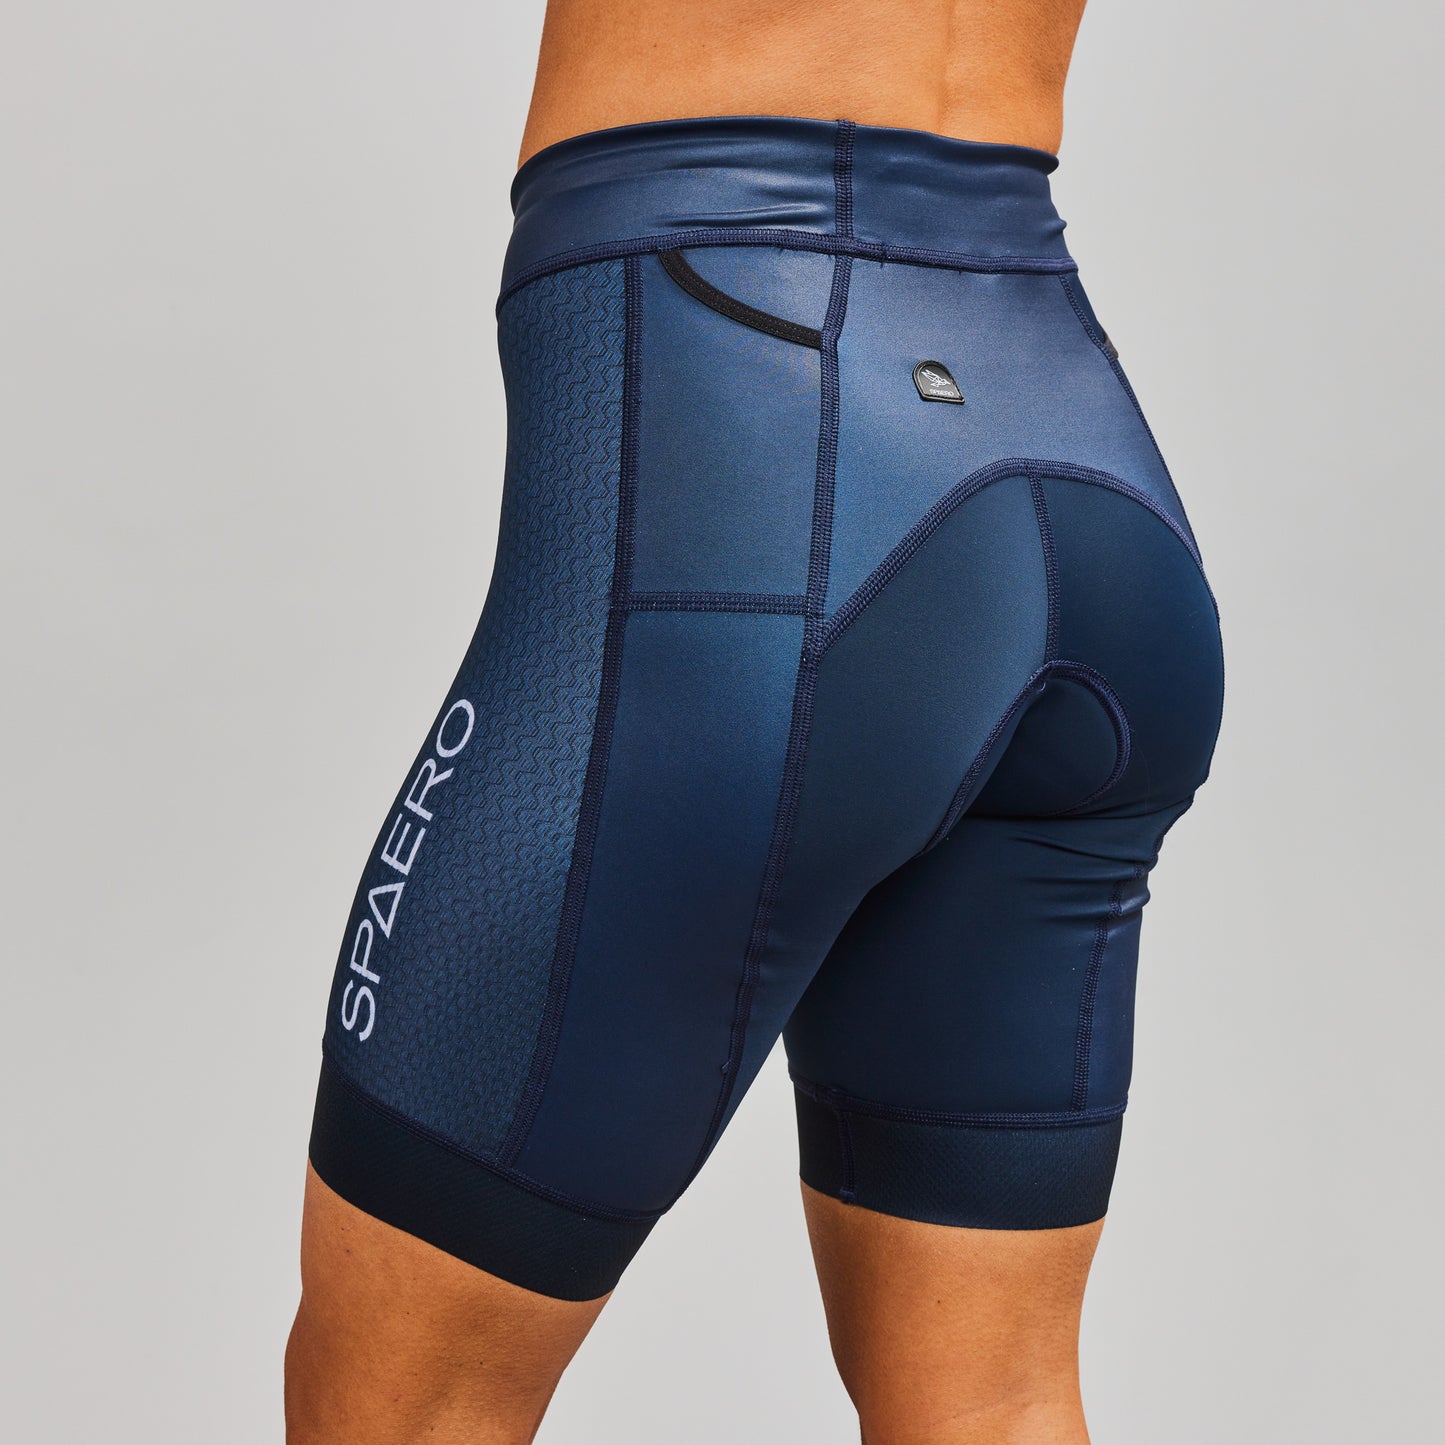 Women's Abyss SP2 Tri Short